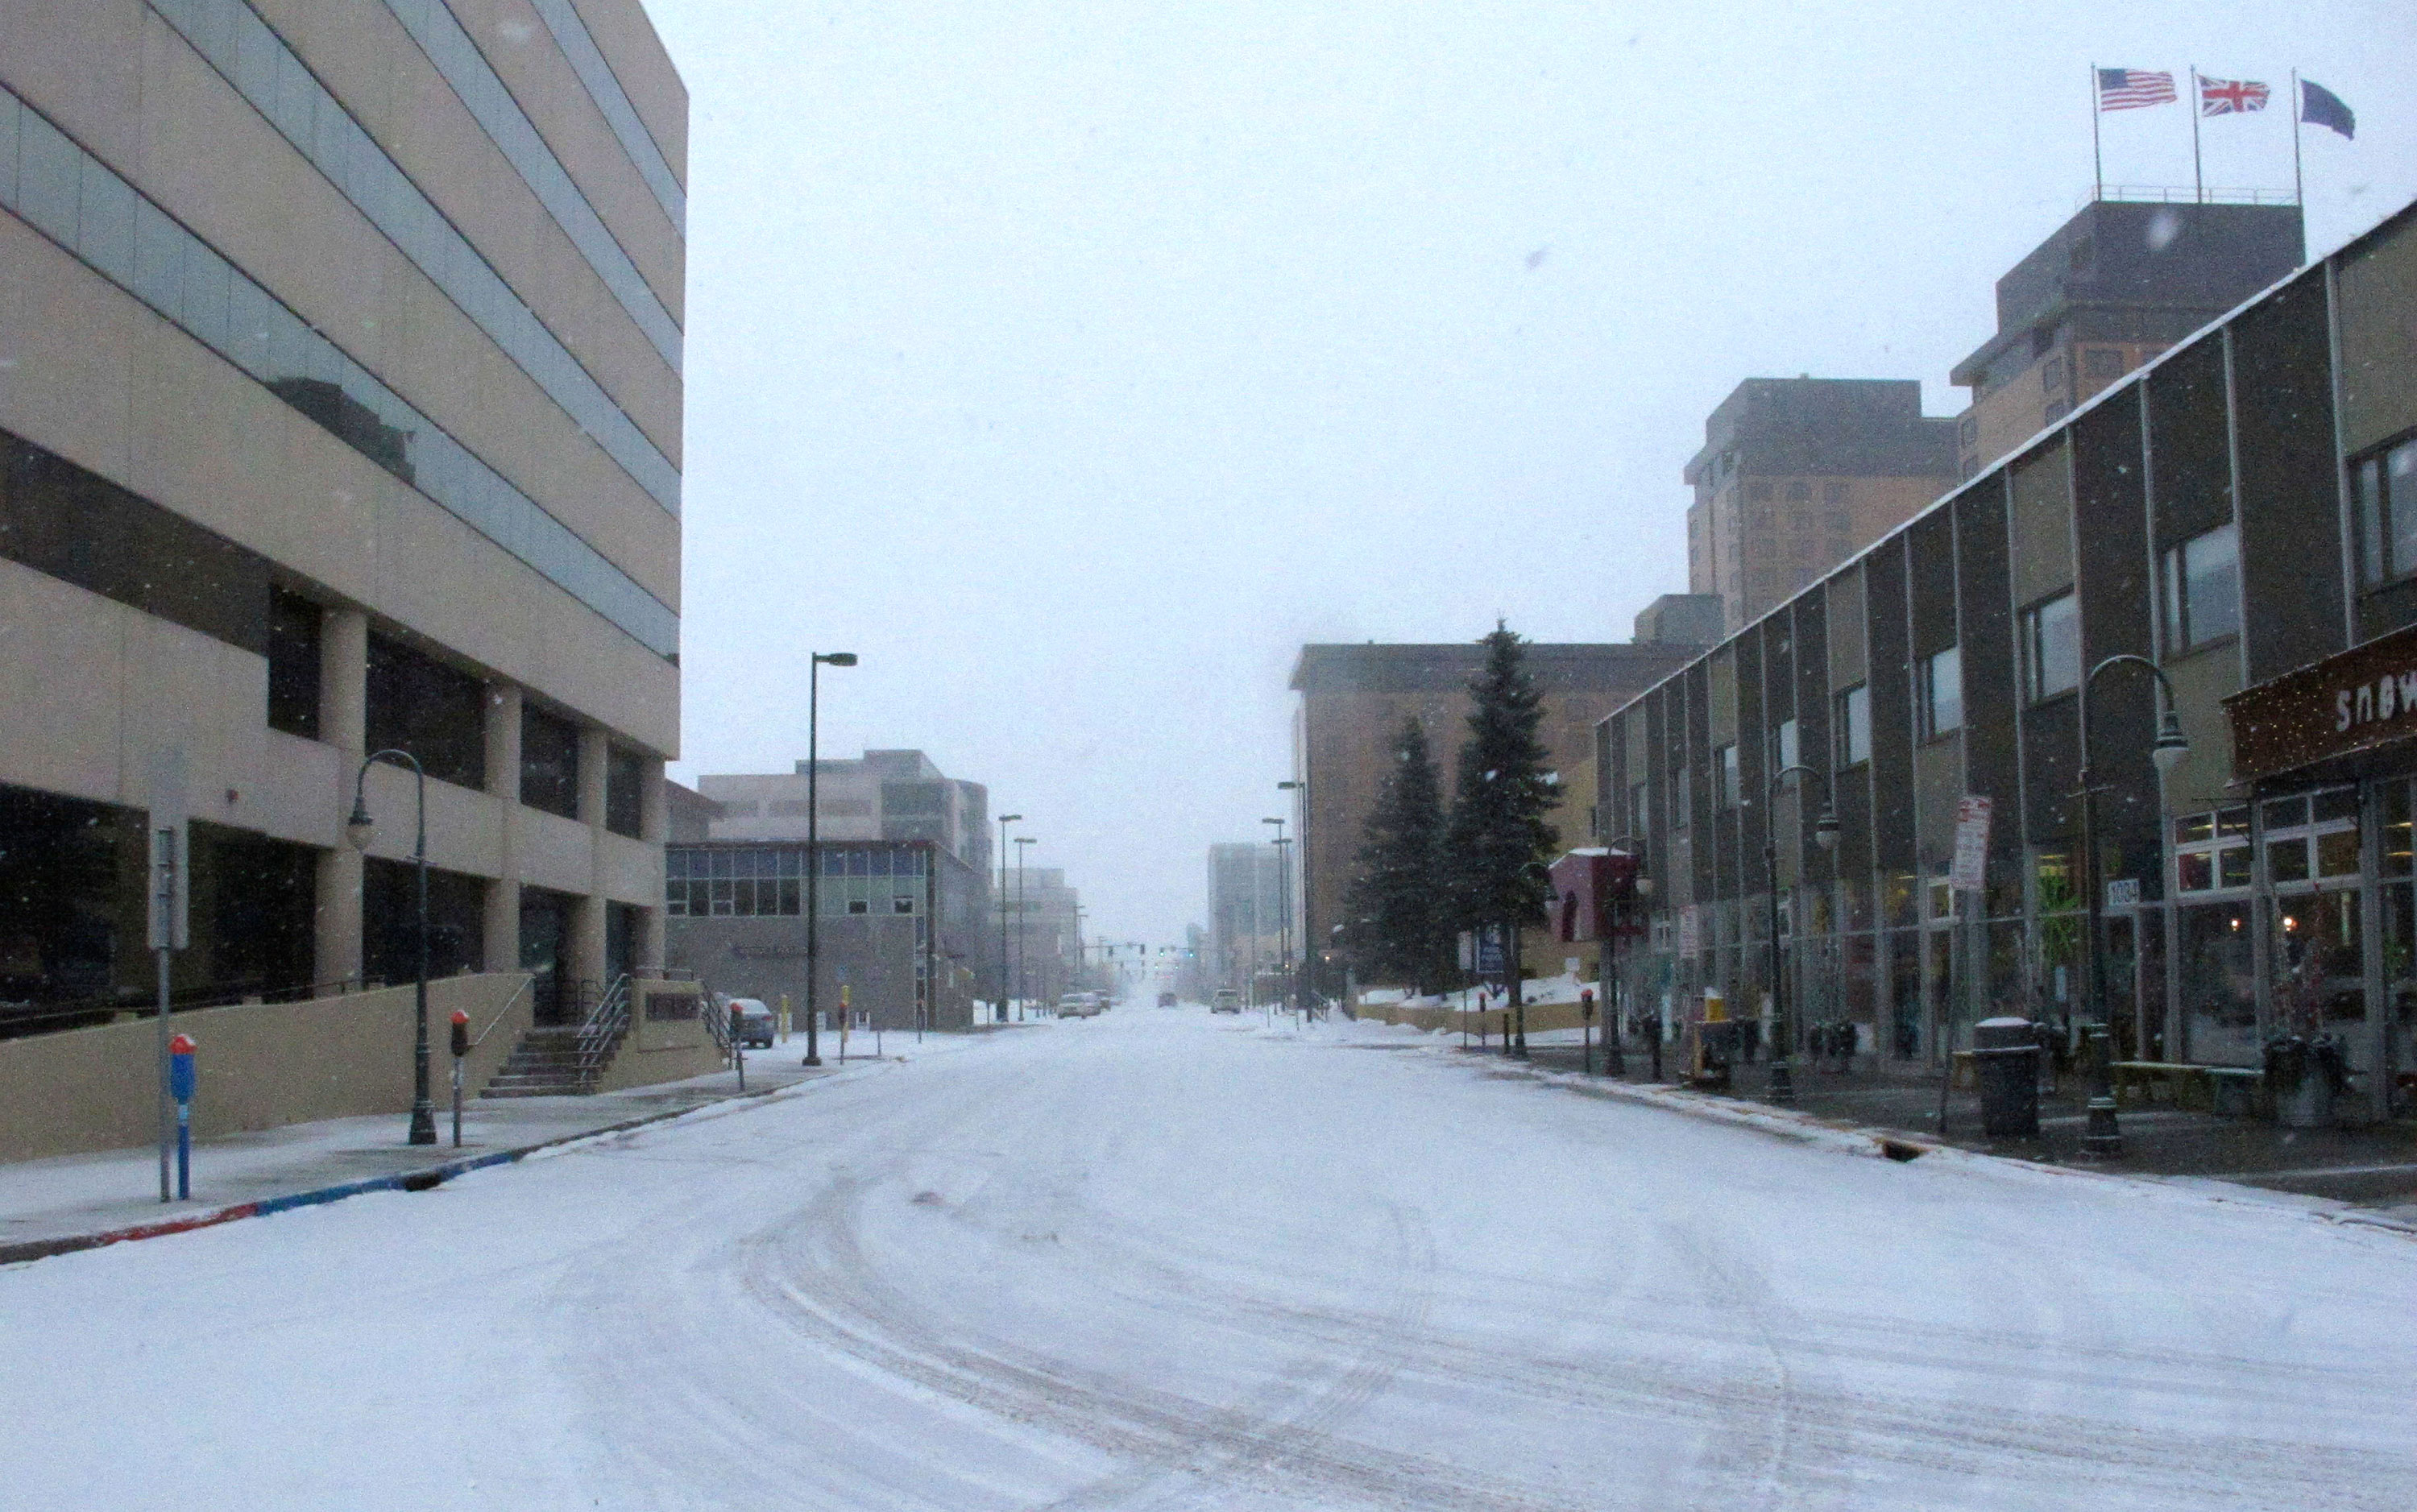 Nearly empty streets are seen in downtown Anchorage, Alaska on March 21.